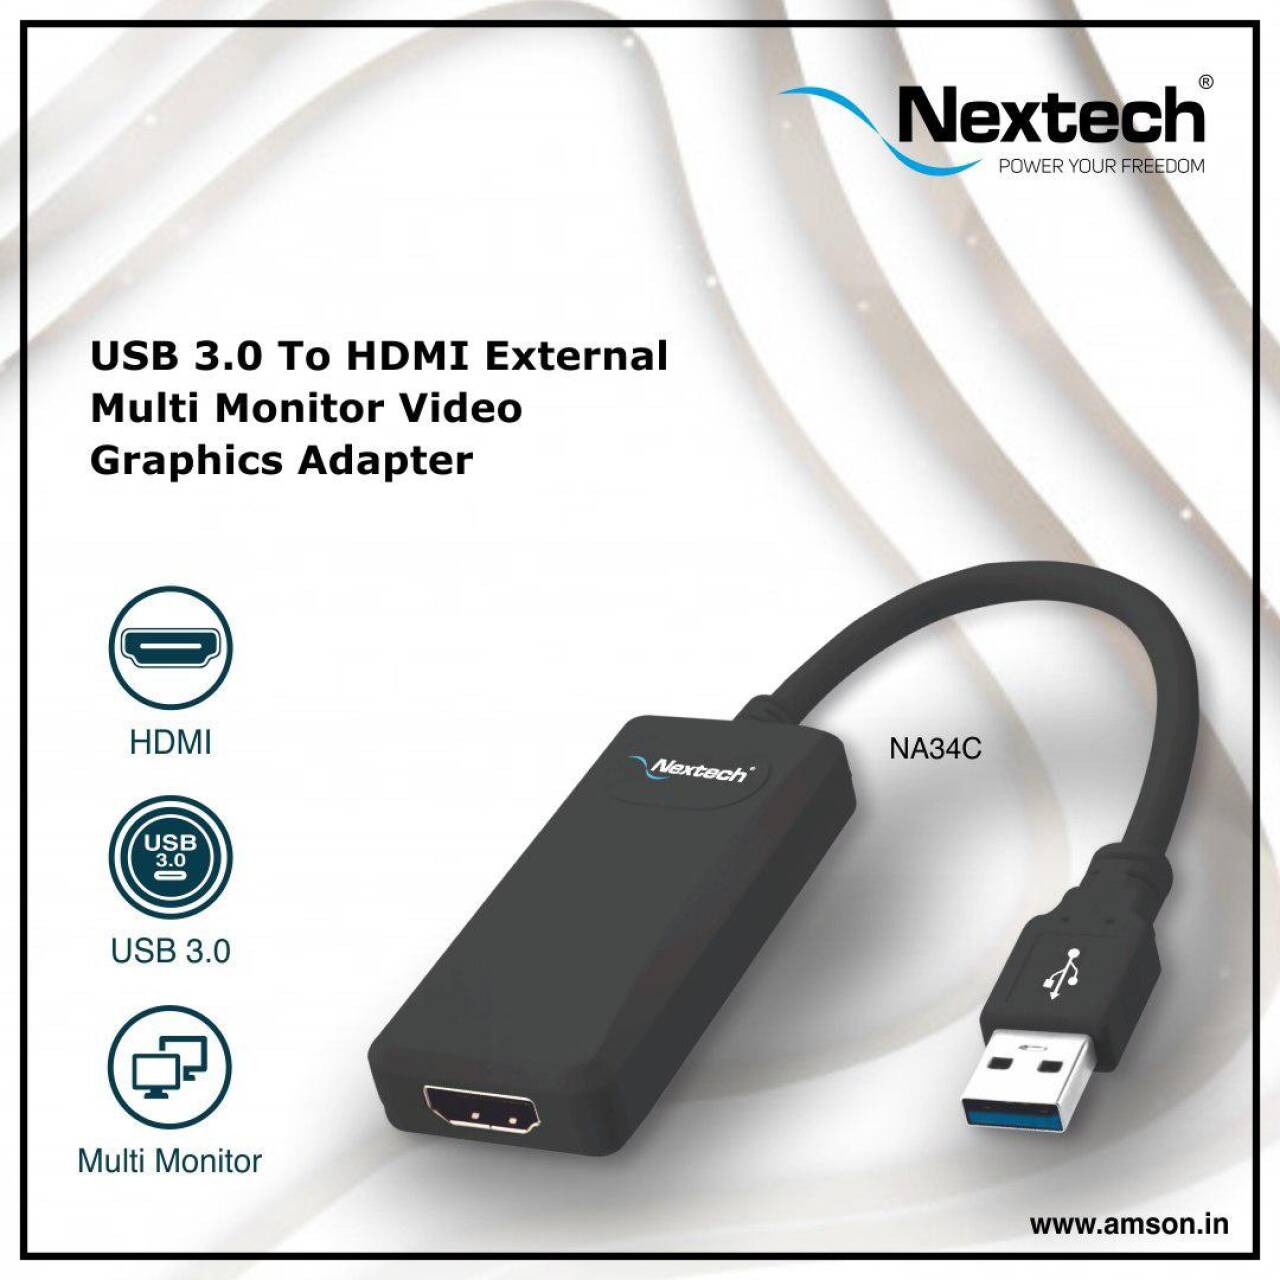 PC/タブレット PC周辺機器 USB 3.0 to HDMI Adapter